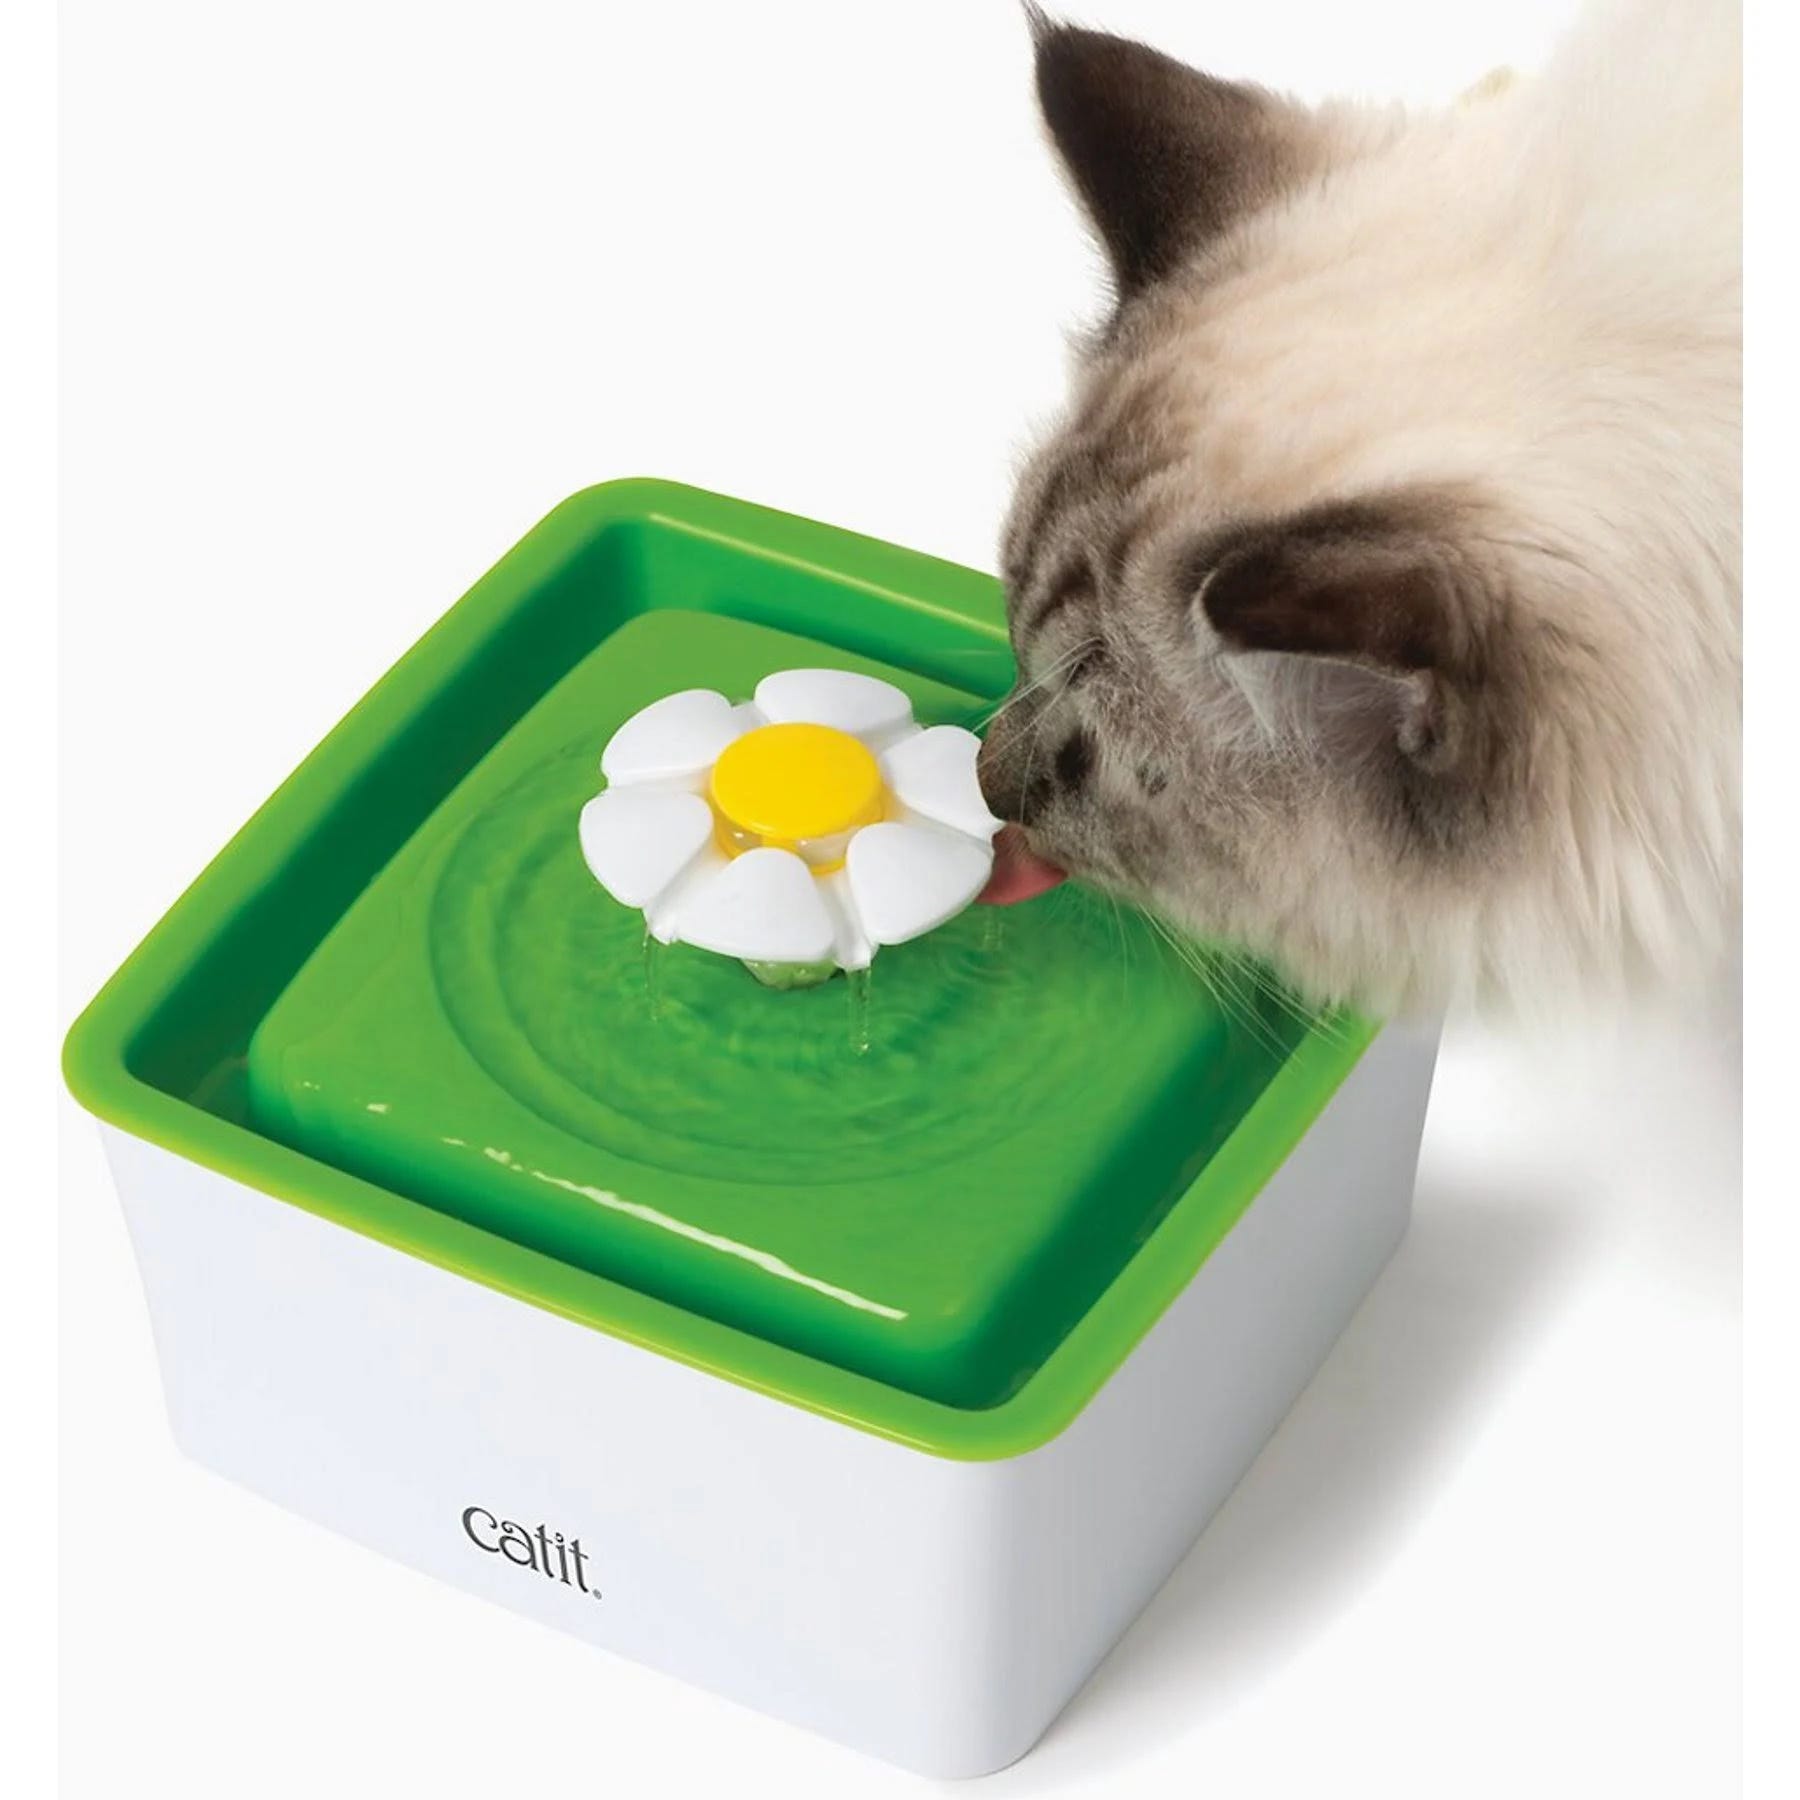 Catit Mini Flower Fountain: Durable Water Source with Flow Settings and BPA-Free Materials | Image